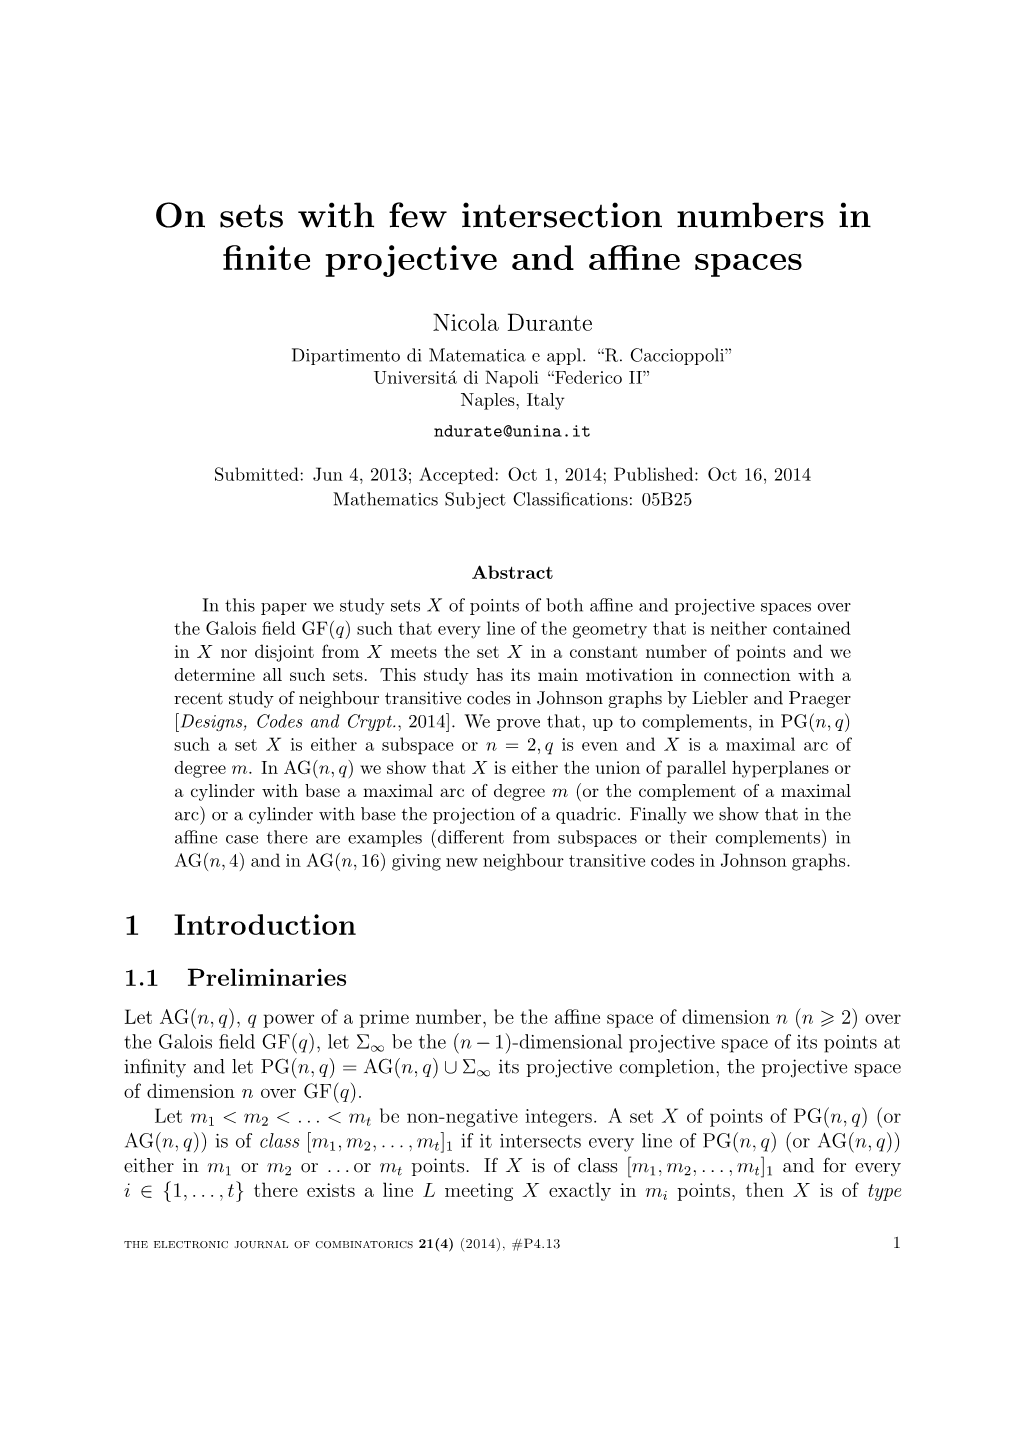 On Sets with Few Intersection Numbers in Finite Projective and Affine Spaces